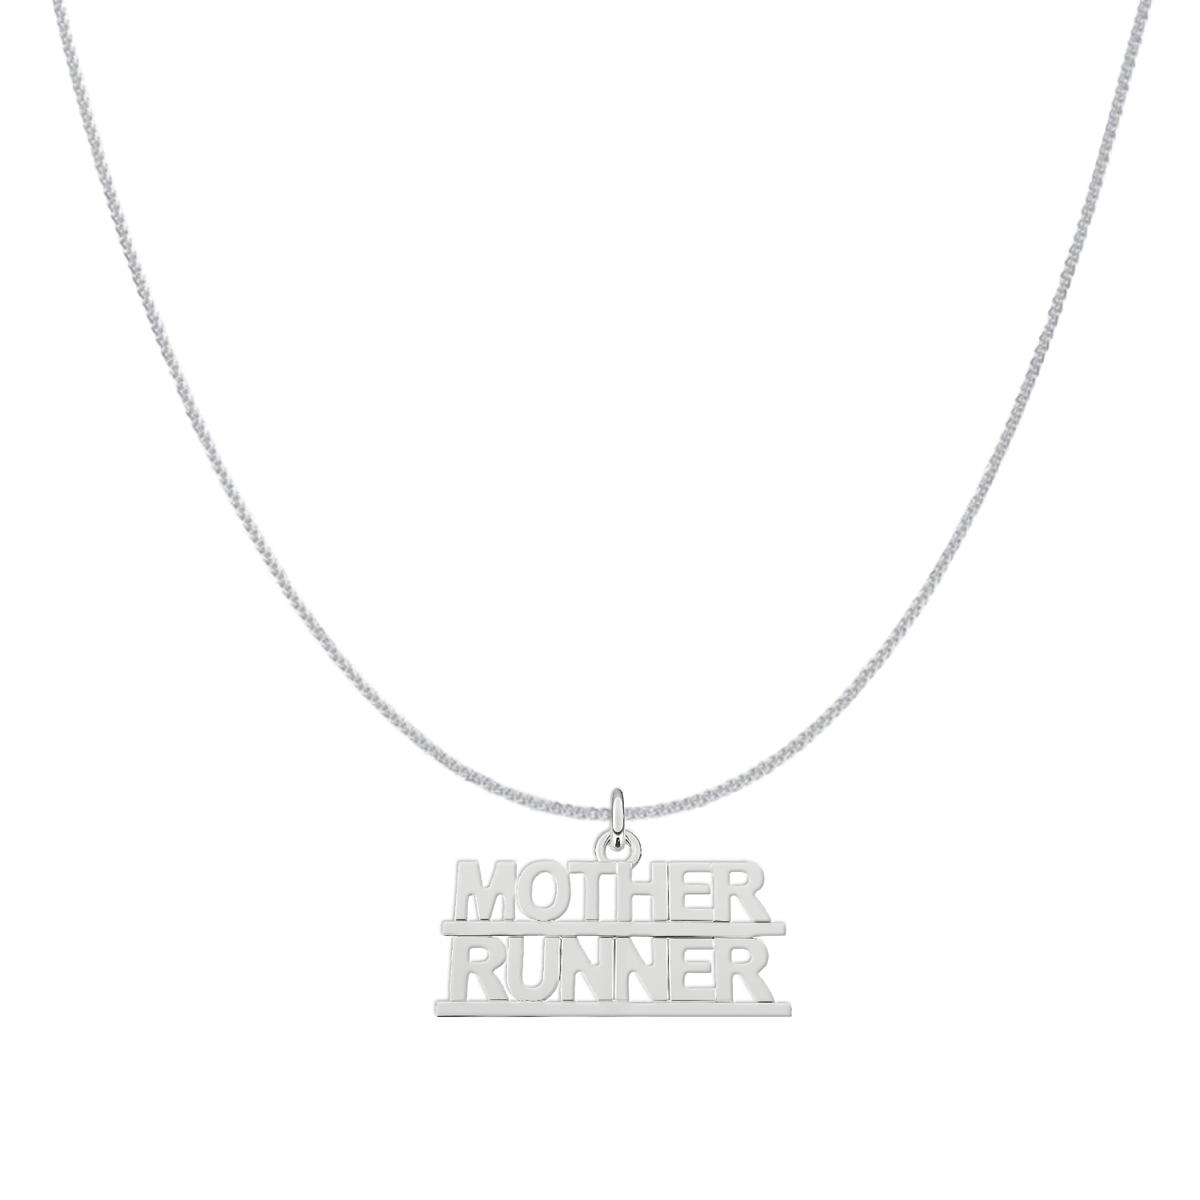 Mother Runner Necklace